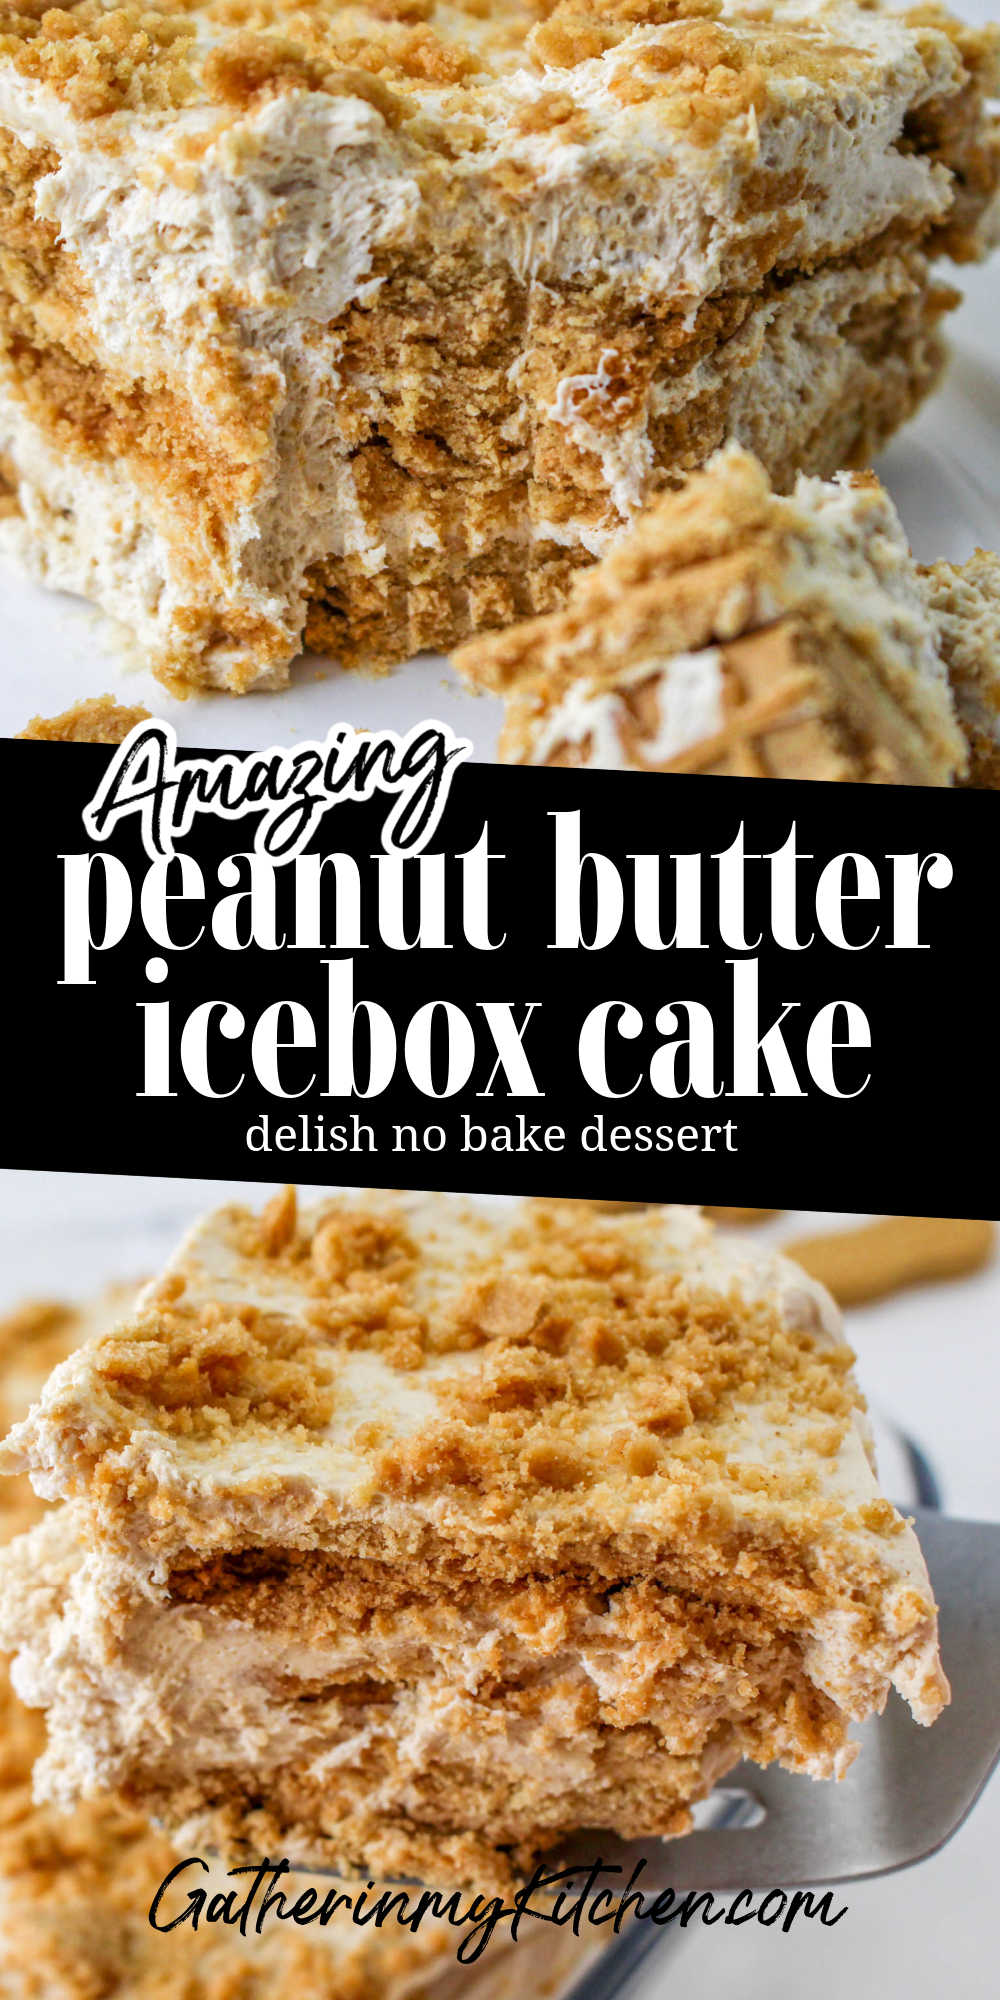 Pin image: top has a piece of peanut butter ice box cake with a bite taken out, middle says "Amazing peanut butter icebox cake: delish no bake dessert" and the bottom has a slice of cake being lifted out of the casserole dish.